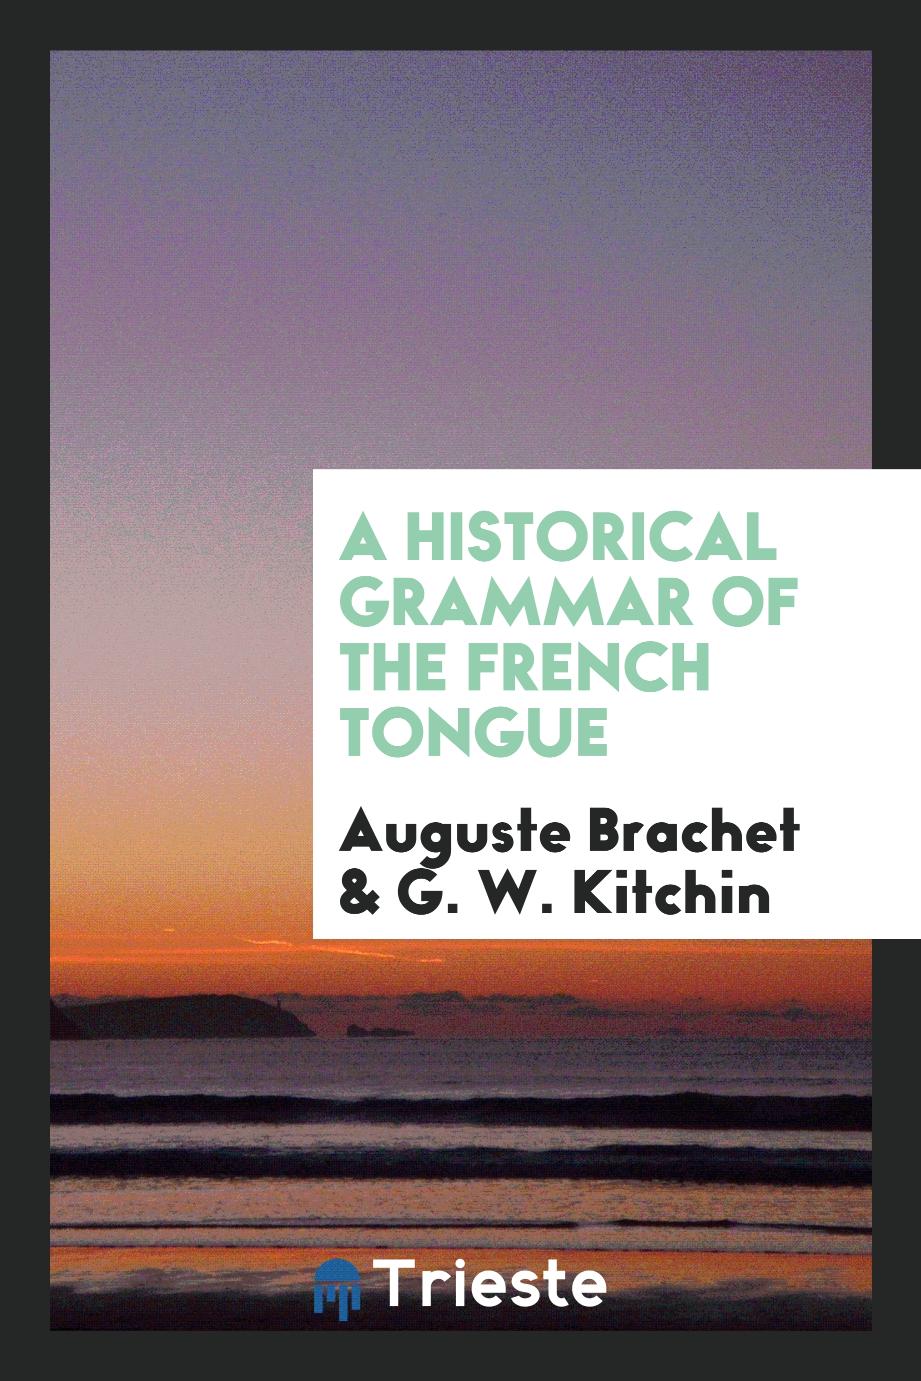 A historical grammar of the French tongue